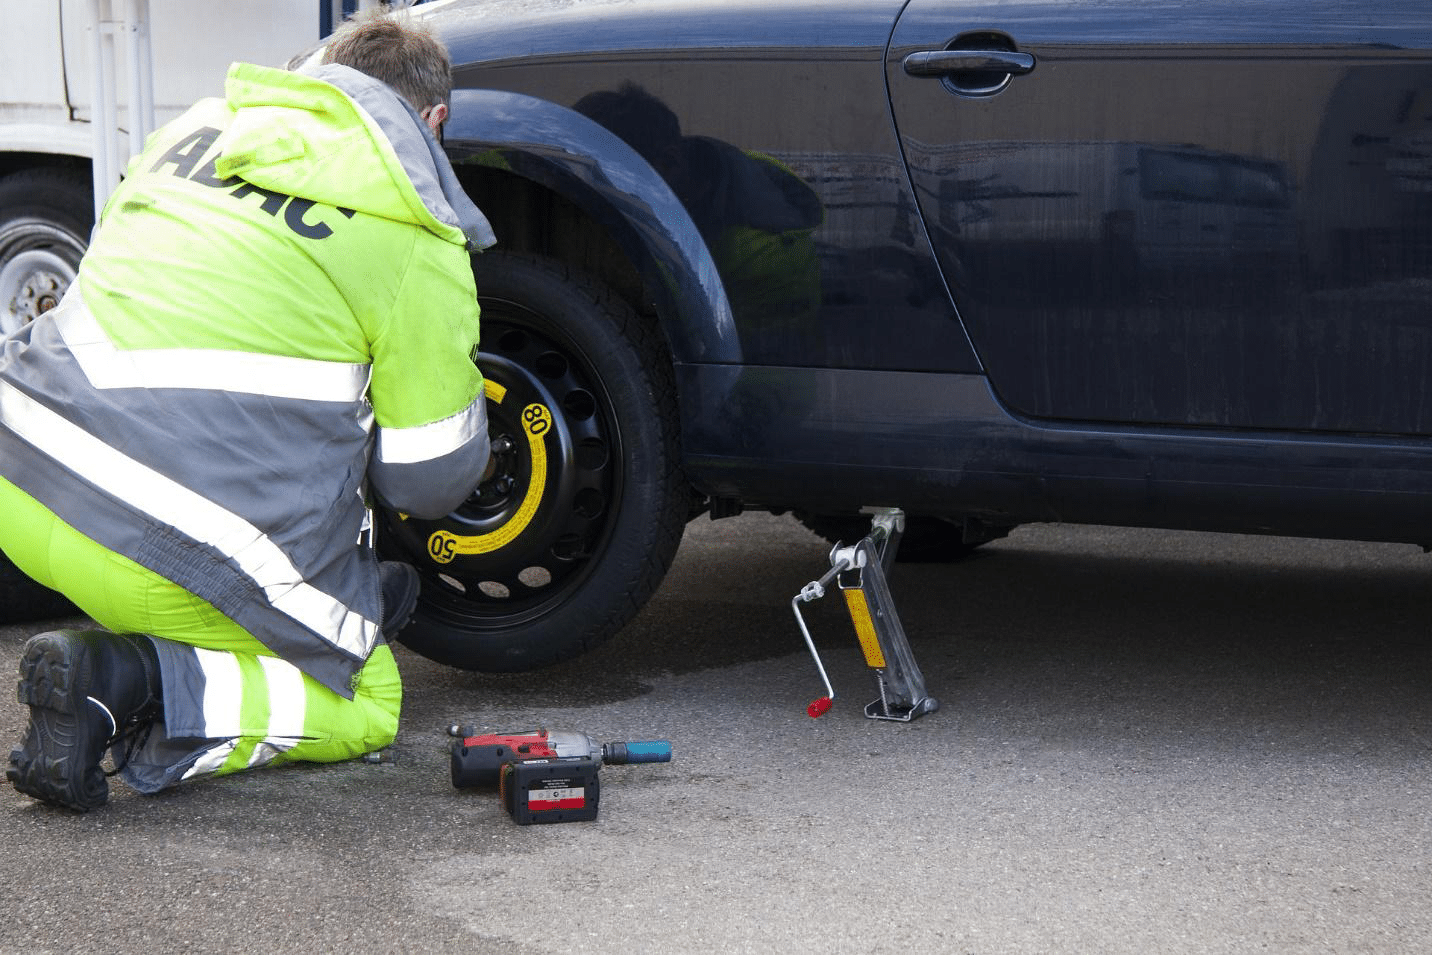 What Size Impact Wrench for Automotive Work? [Lug Nuts & More]